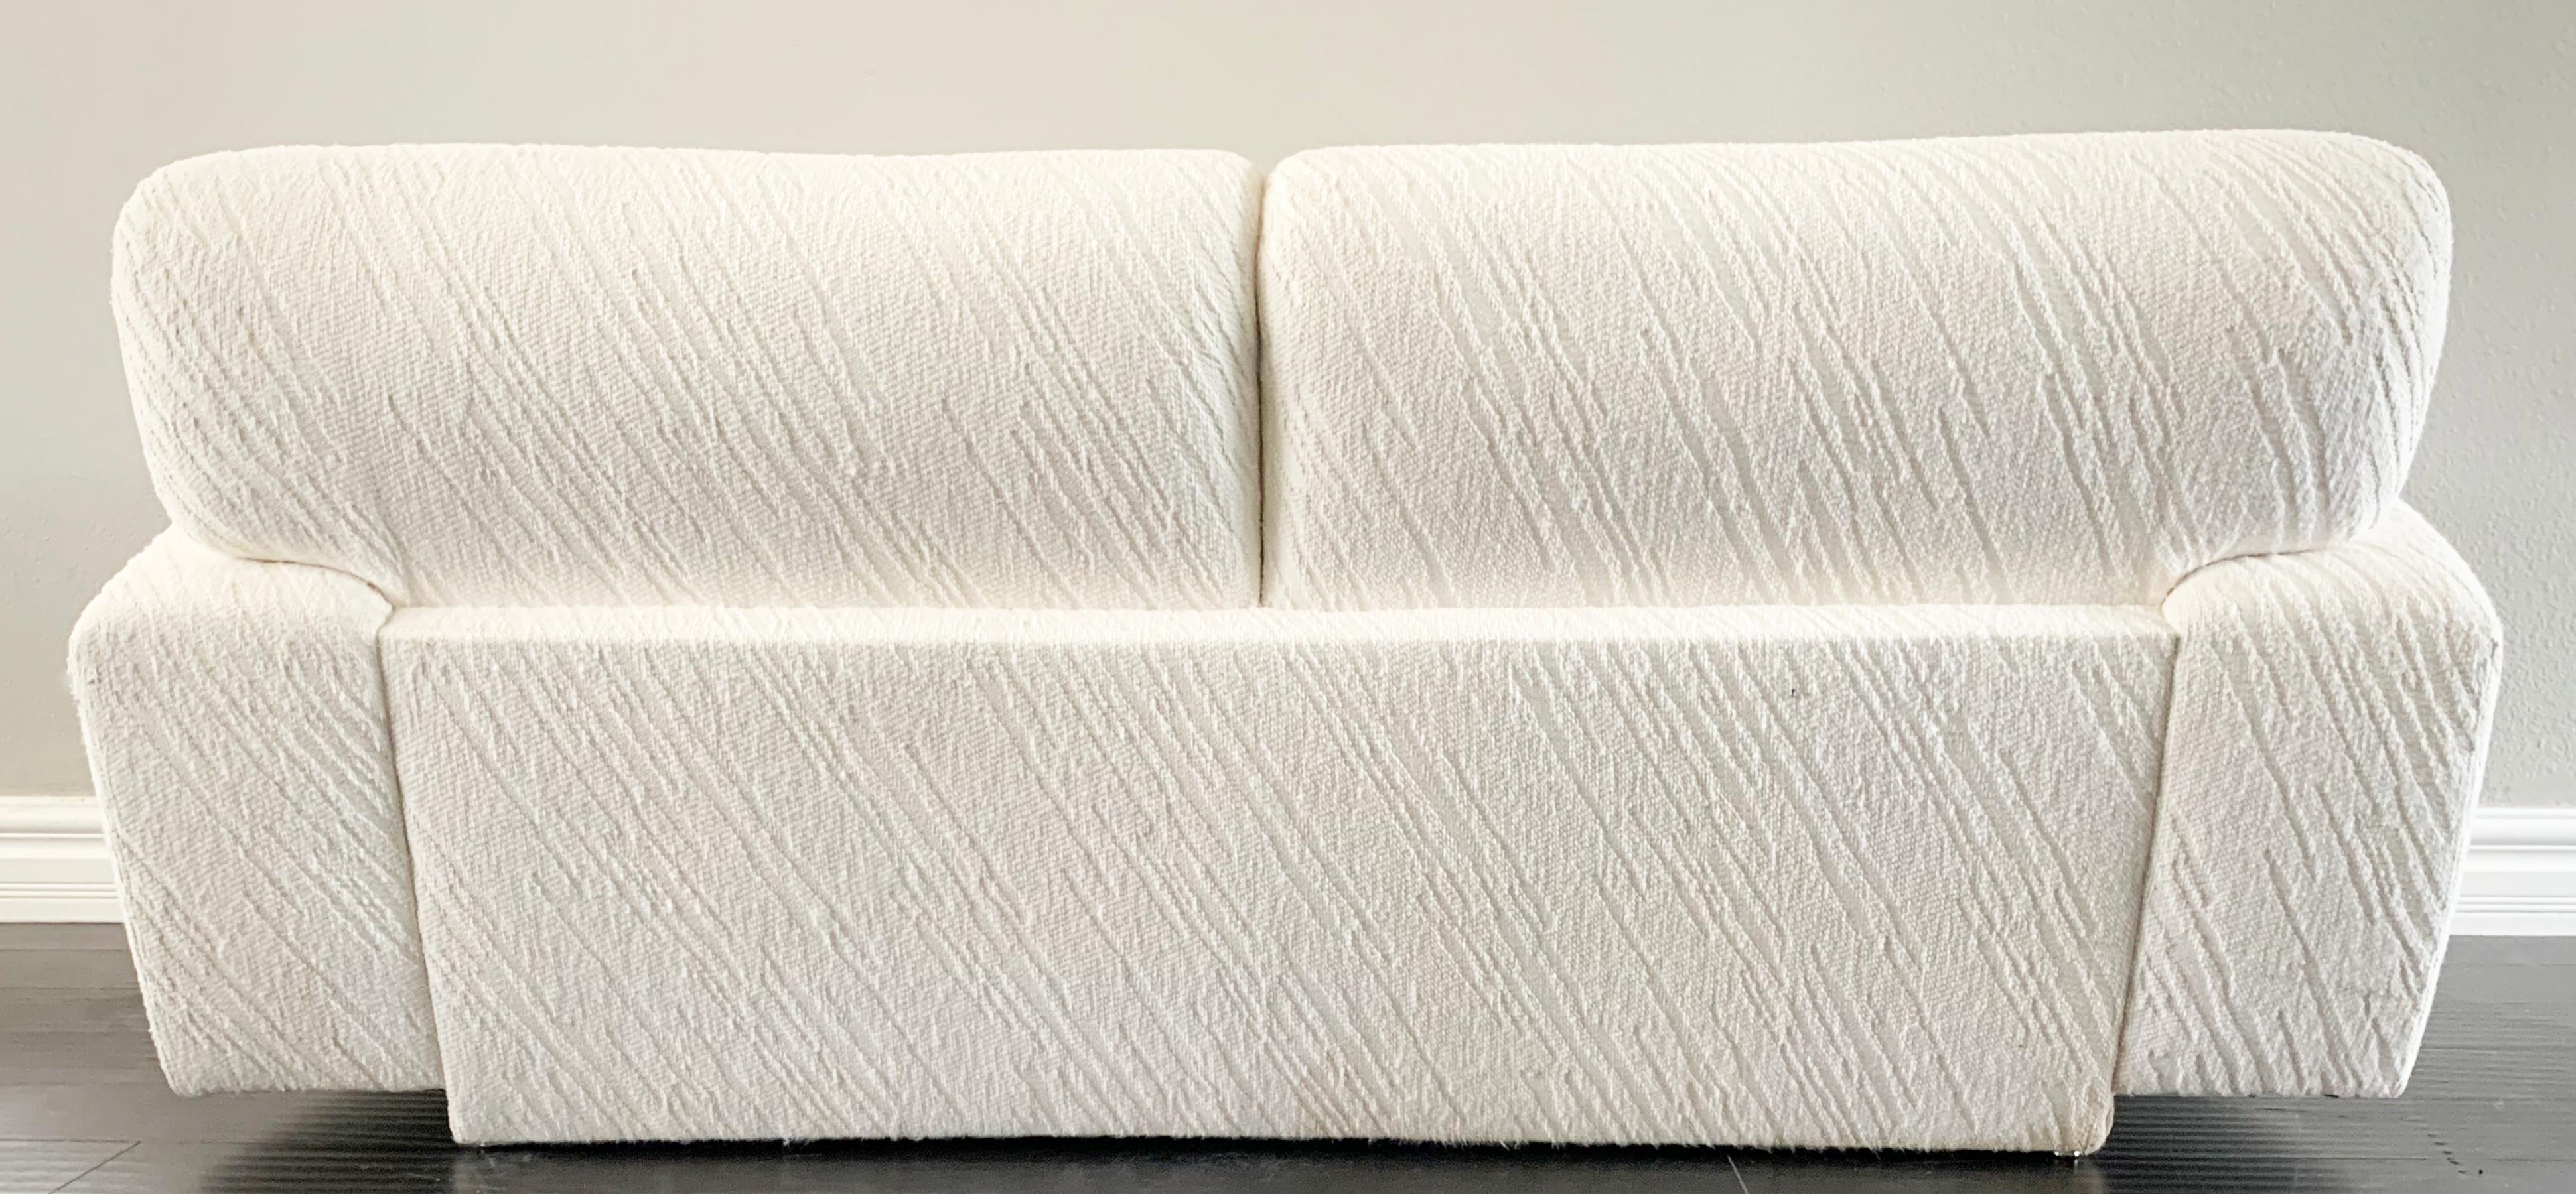 Available right now we have this gorgeous white loveseat sofa. This sofa's curves rival that of Kim Kardashian any day! The curvy silhouette and cool modern plinth base give this Postmodern sofa a wonderful, clean look that is sure to bring a touch